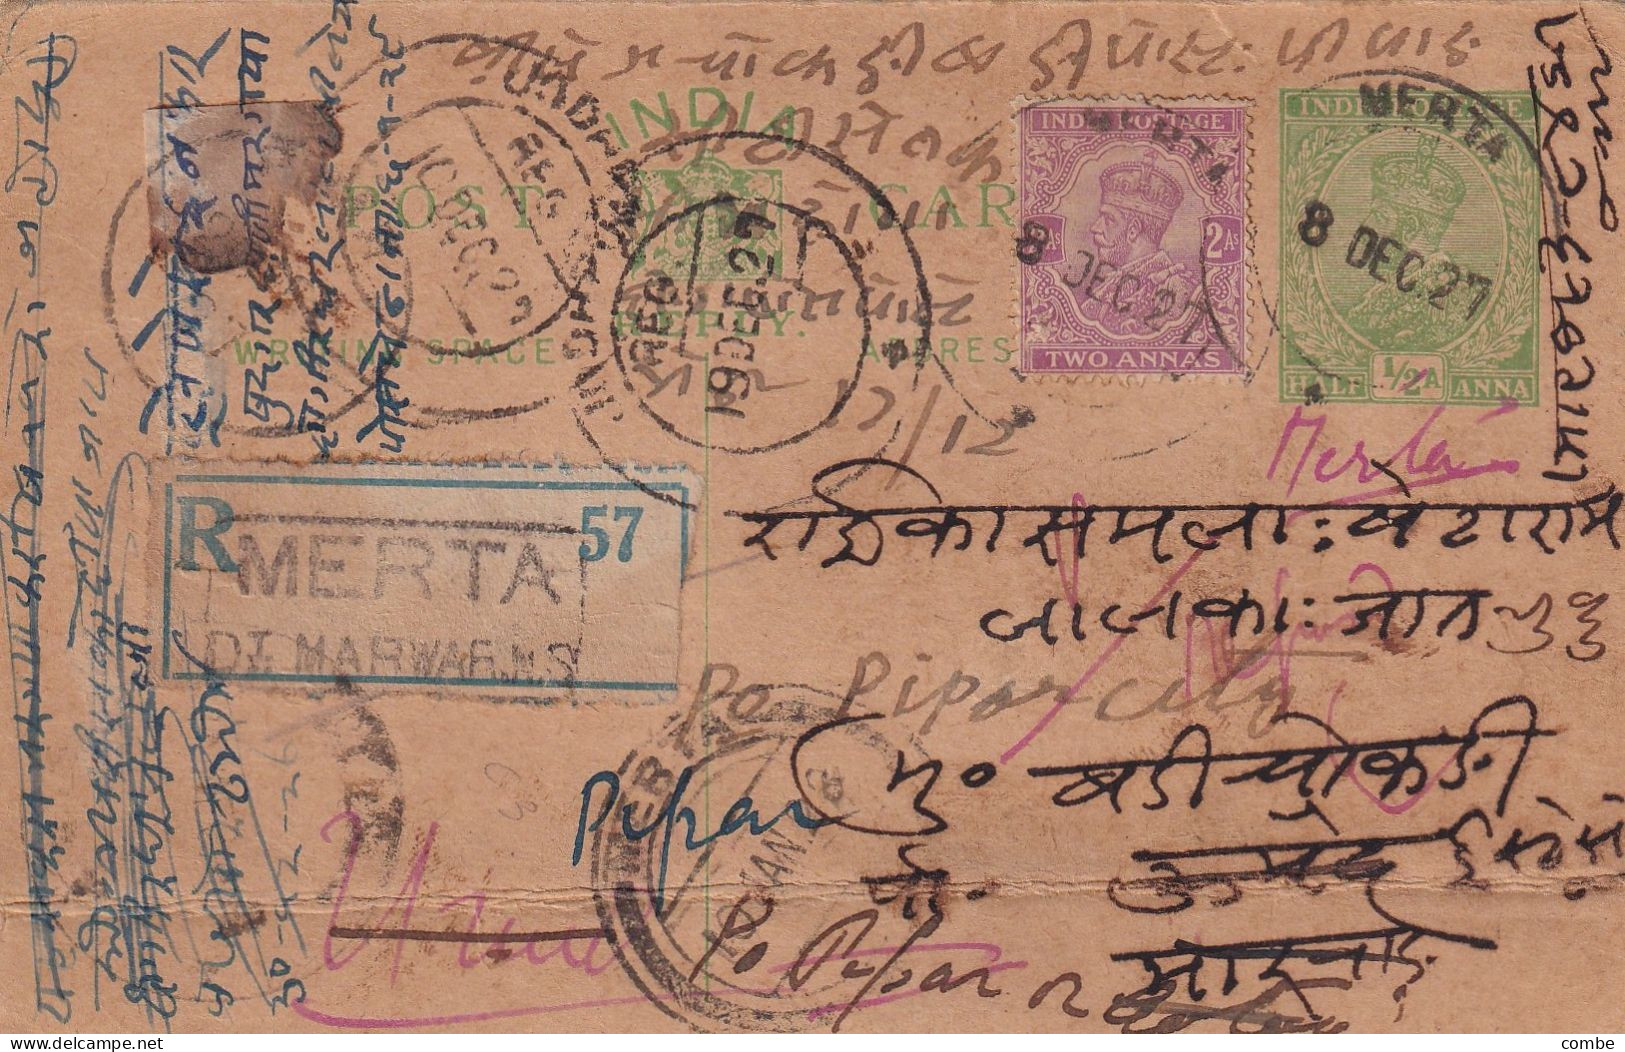 POSTCARD INDIA. 8 12 1927. STATIONNERY 1/2A + 2As. REGISTERED MERTA. ATTEMPTED DELIVERY 0N 10 DEC . 19 DEC REFUSED...... - 1911-35 Roi Georges V